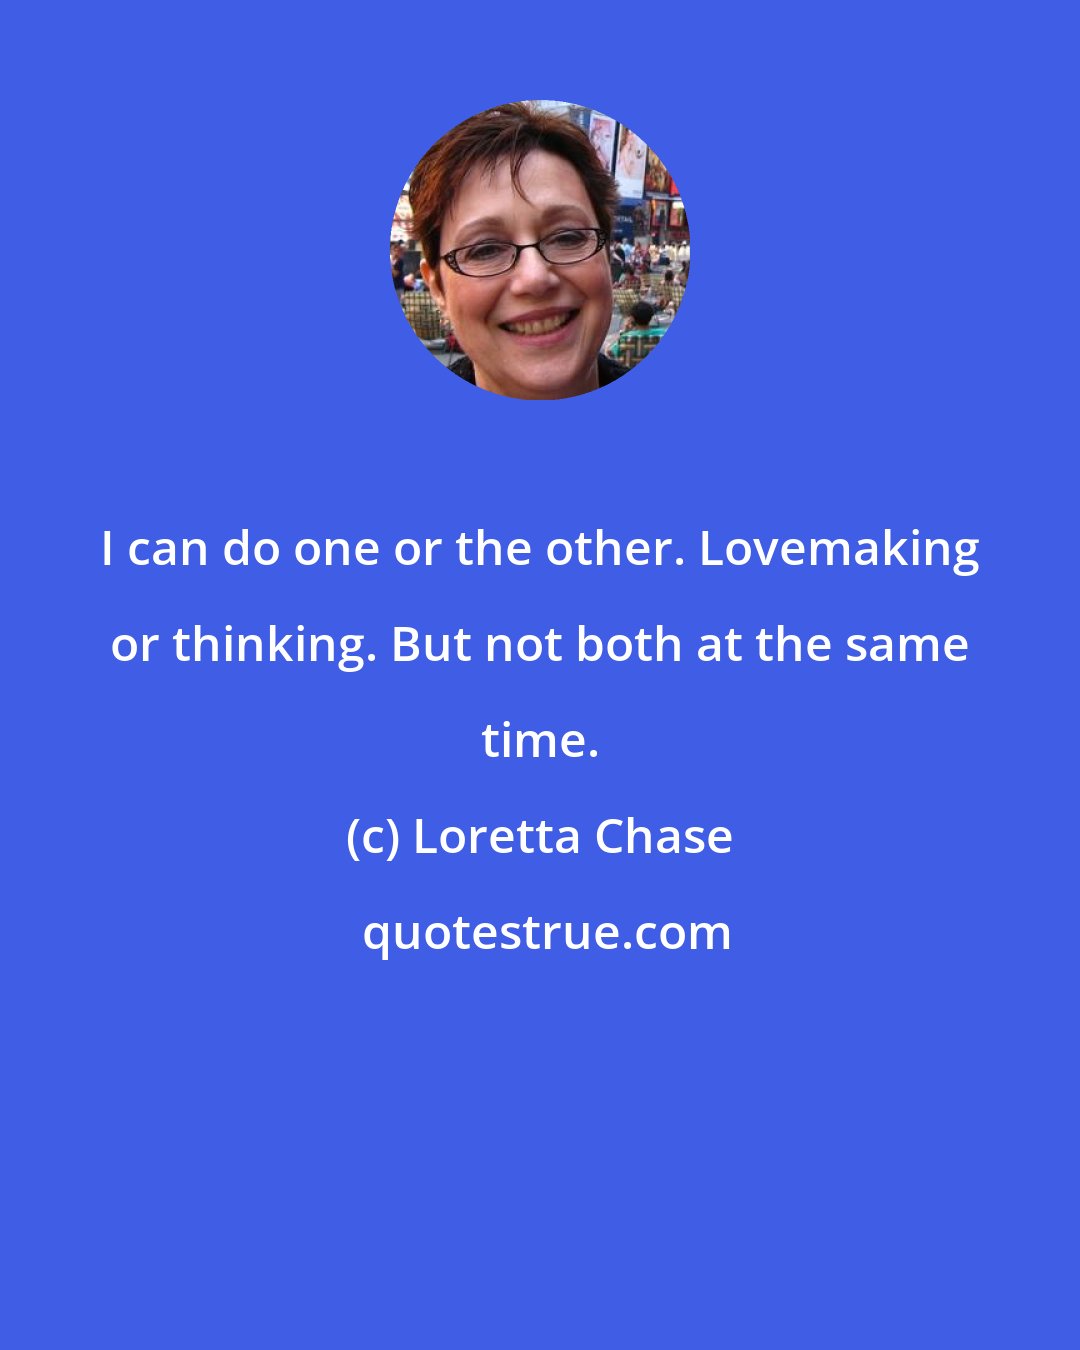 Loretta Chase: I can do one or the other. Lovemaking or thinking. But not both at the same time.